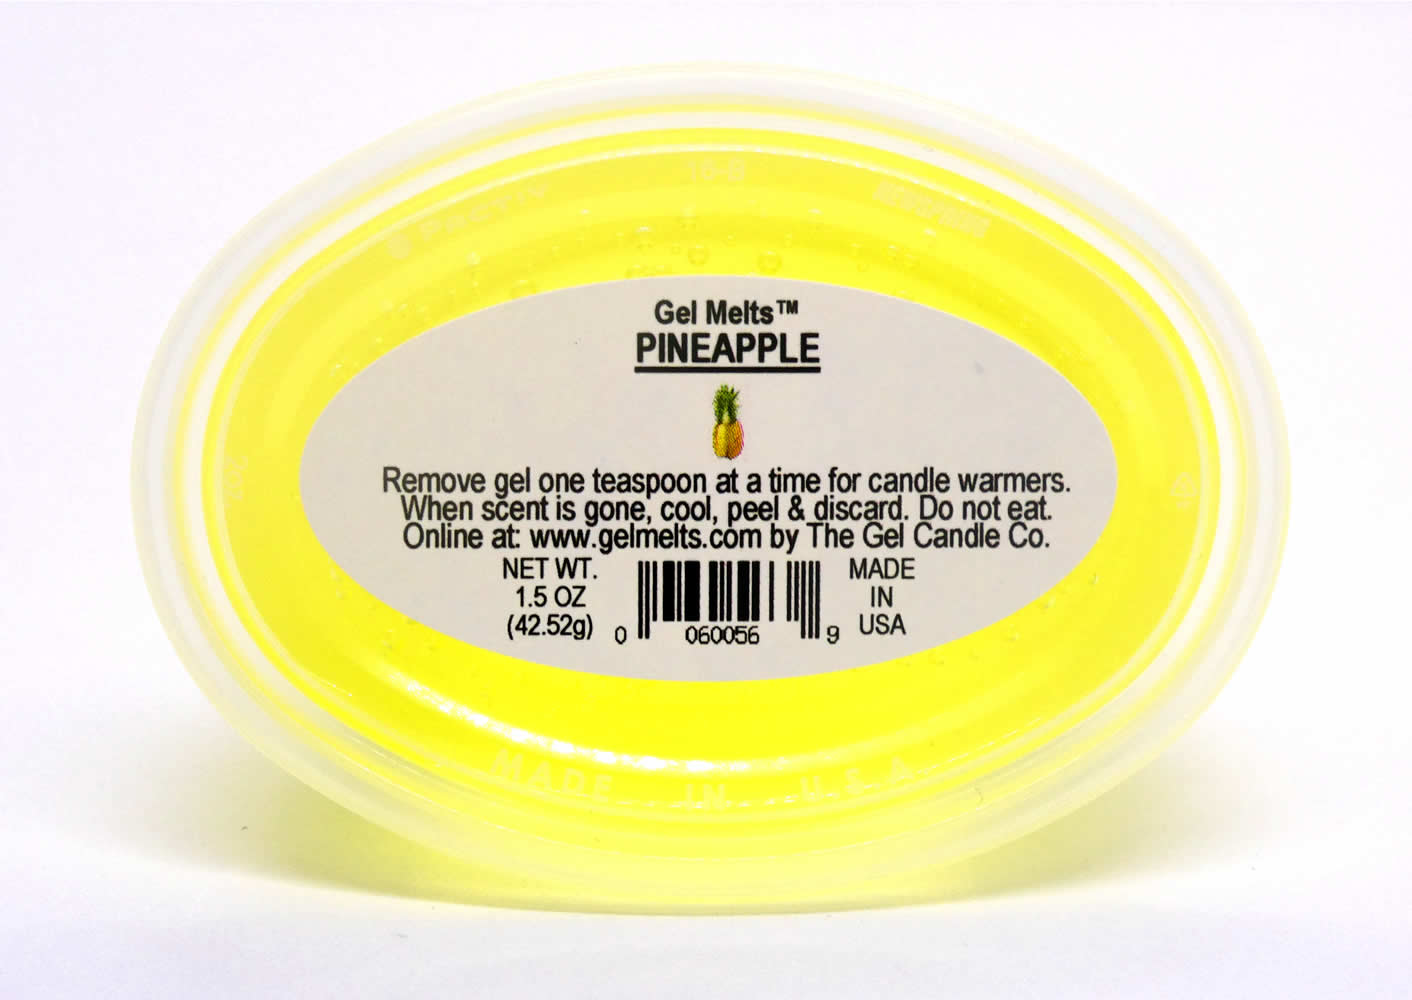 Pineapple scented Gel Melts™ Gel Wax for warmers - 3 pack - Click Image to Close